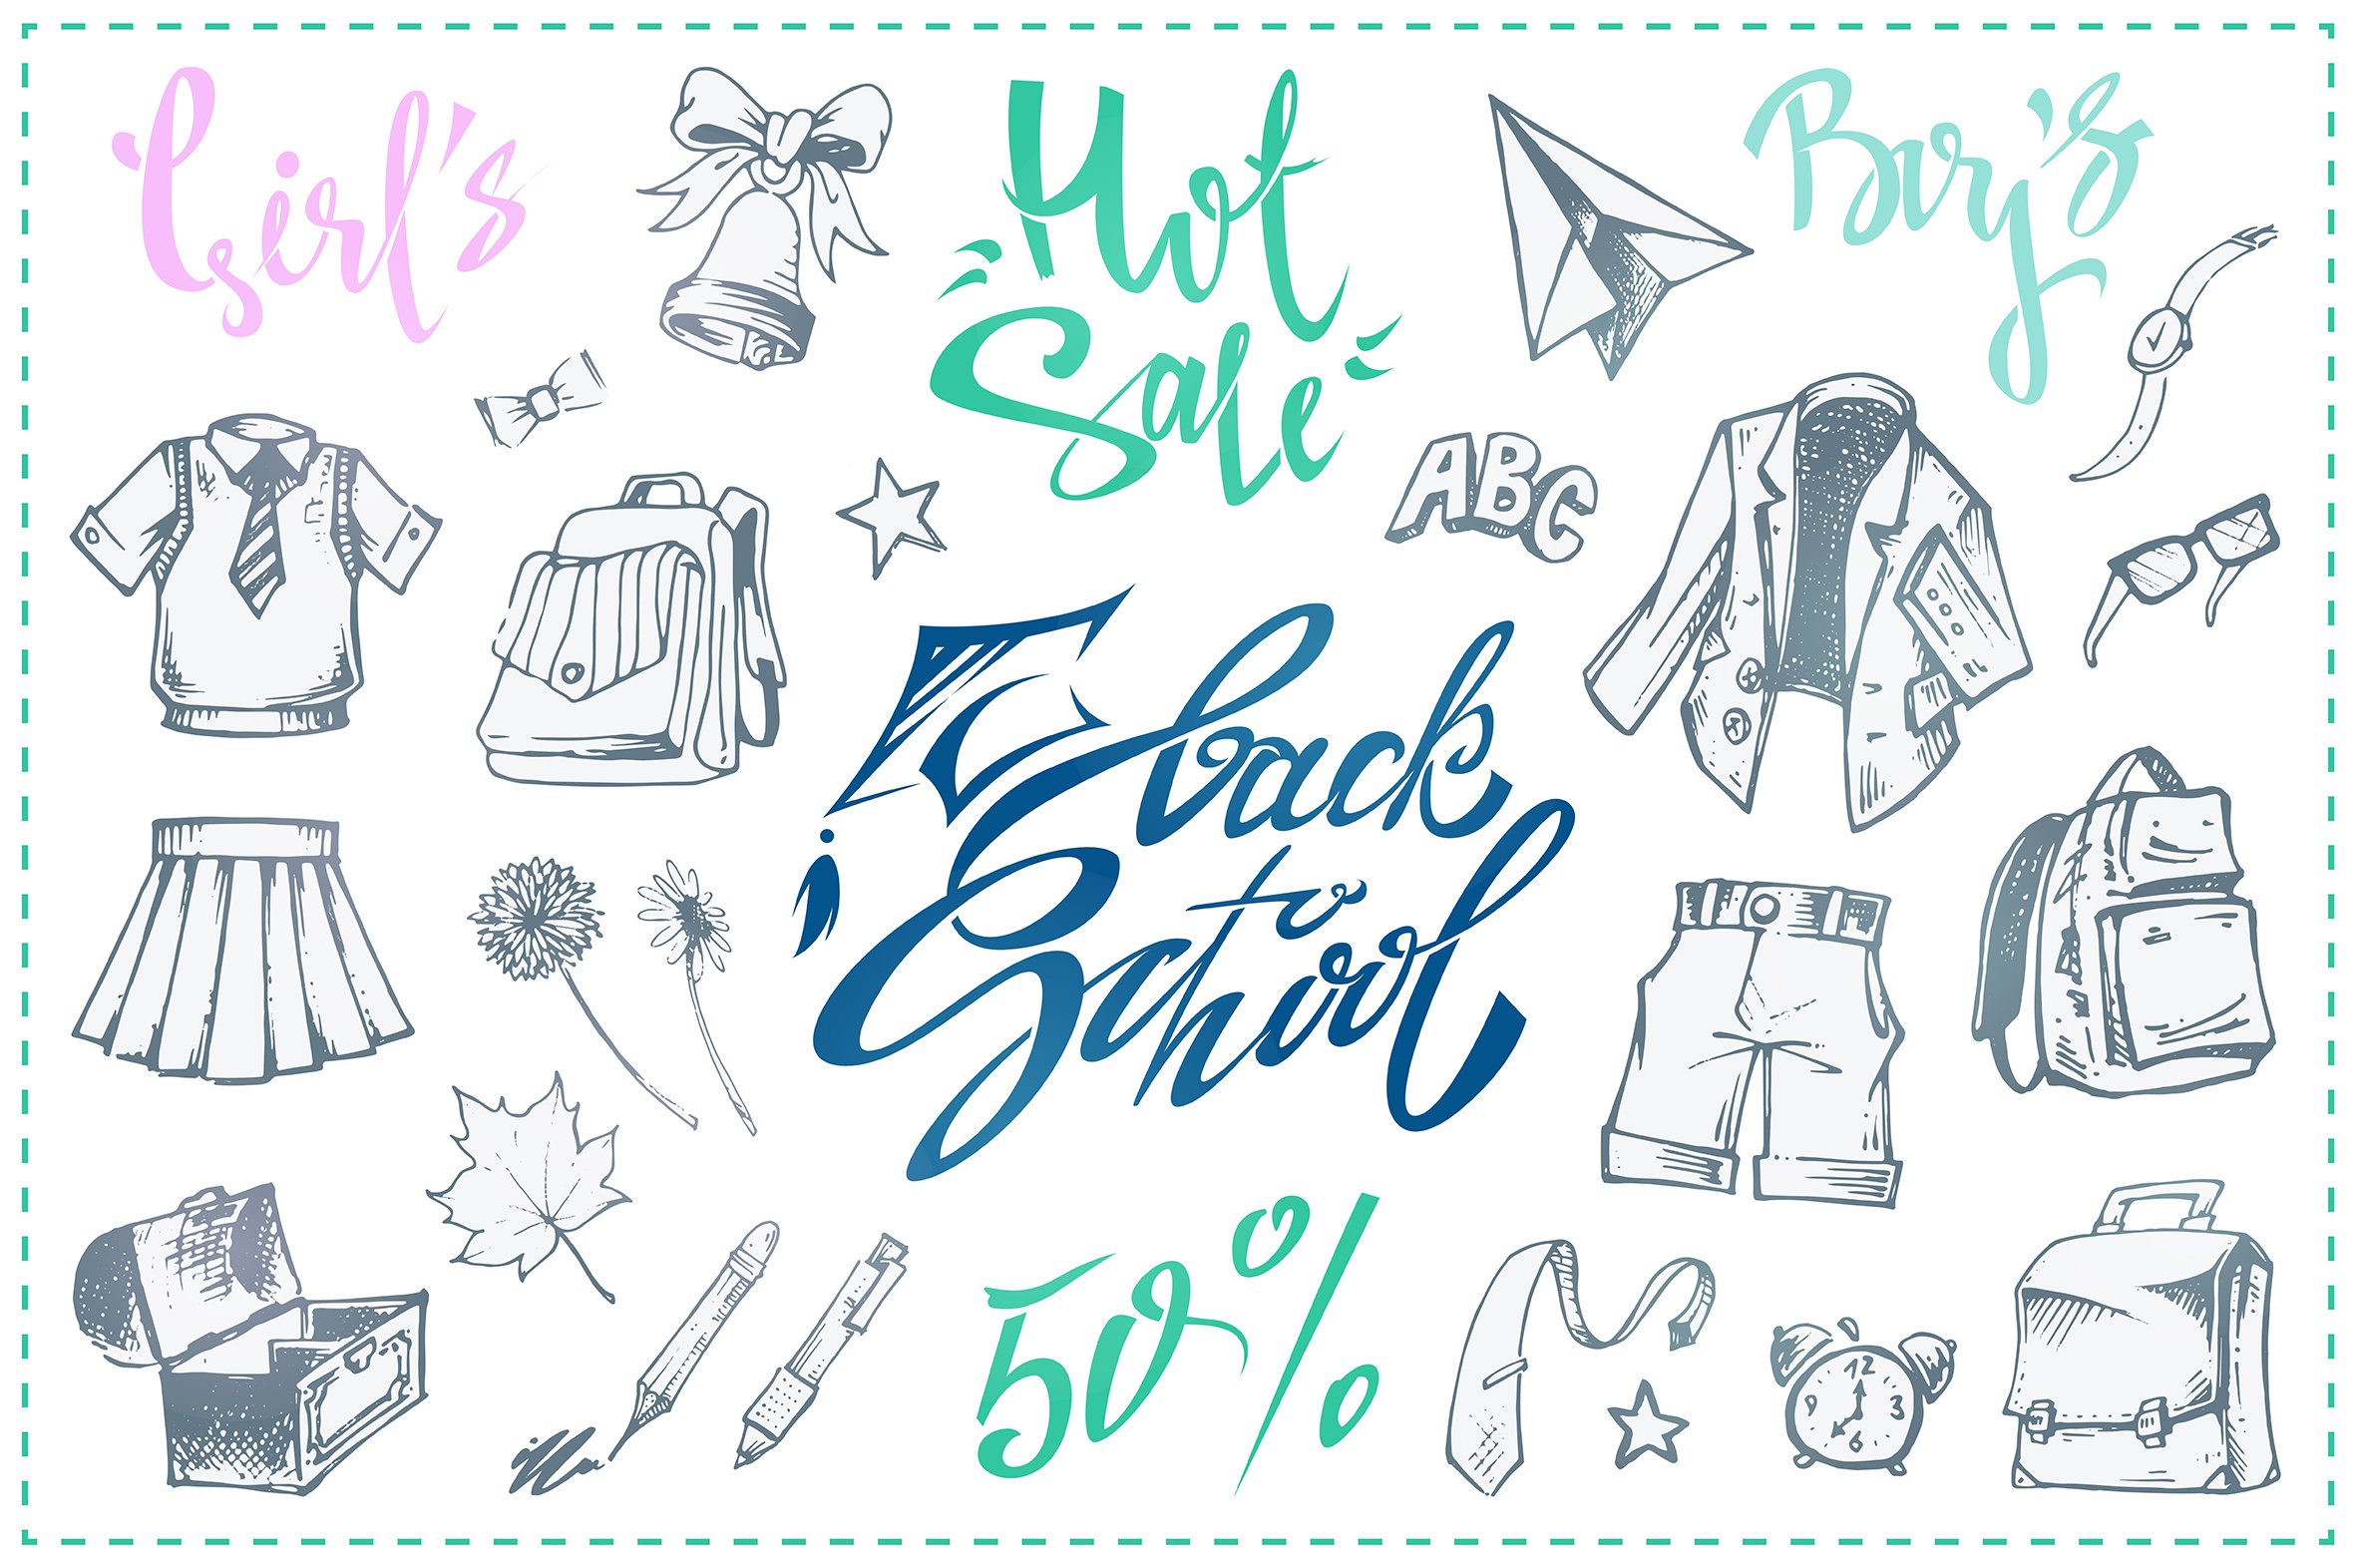 calligraphic inscriptions back to school girls boys hot sale 50 . sketch icons of school uniform bag lunchbox. isolated vector. to design stores sales 331